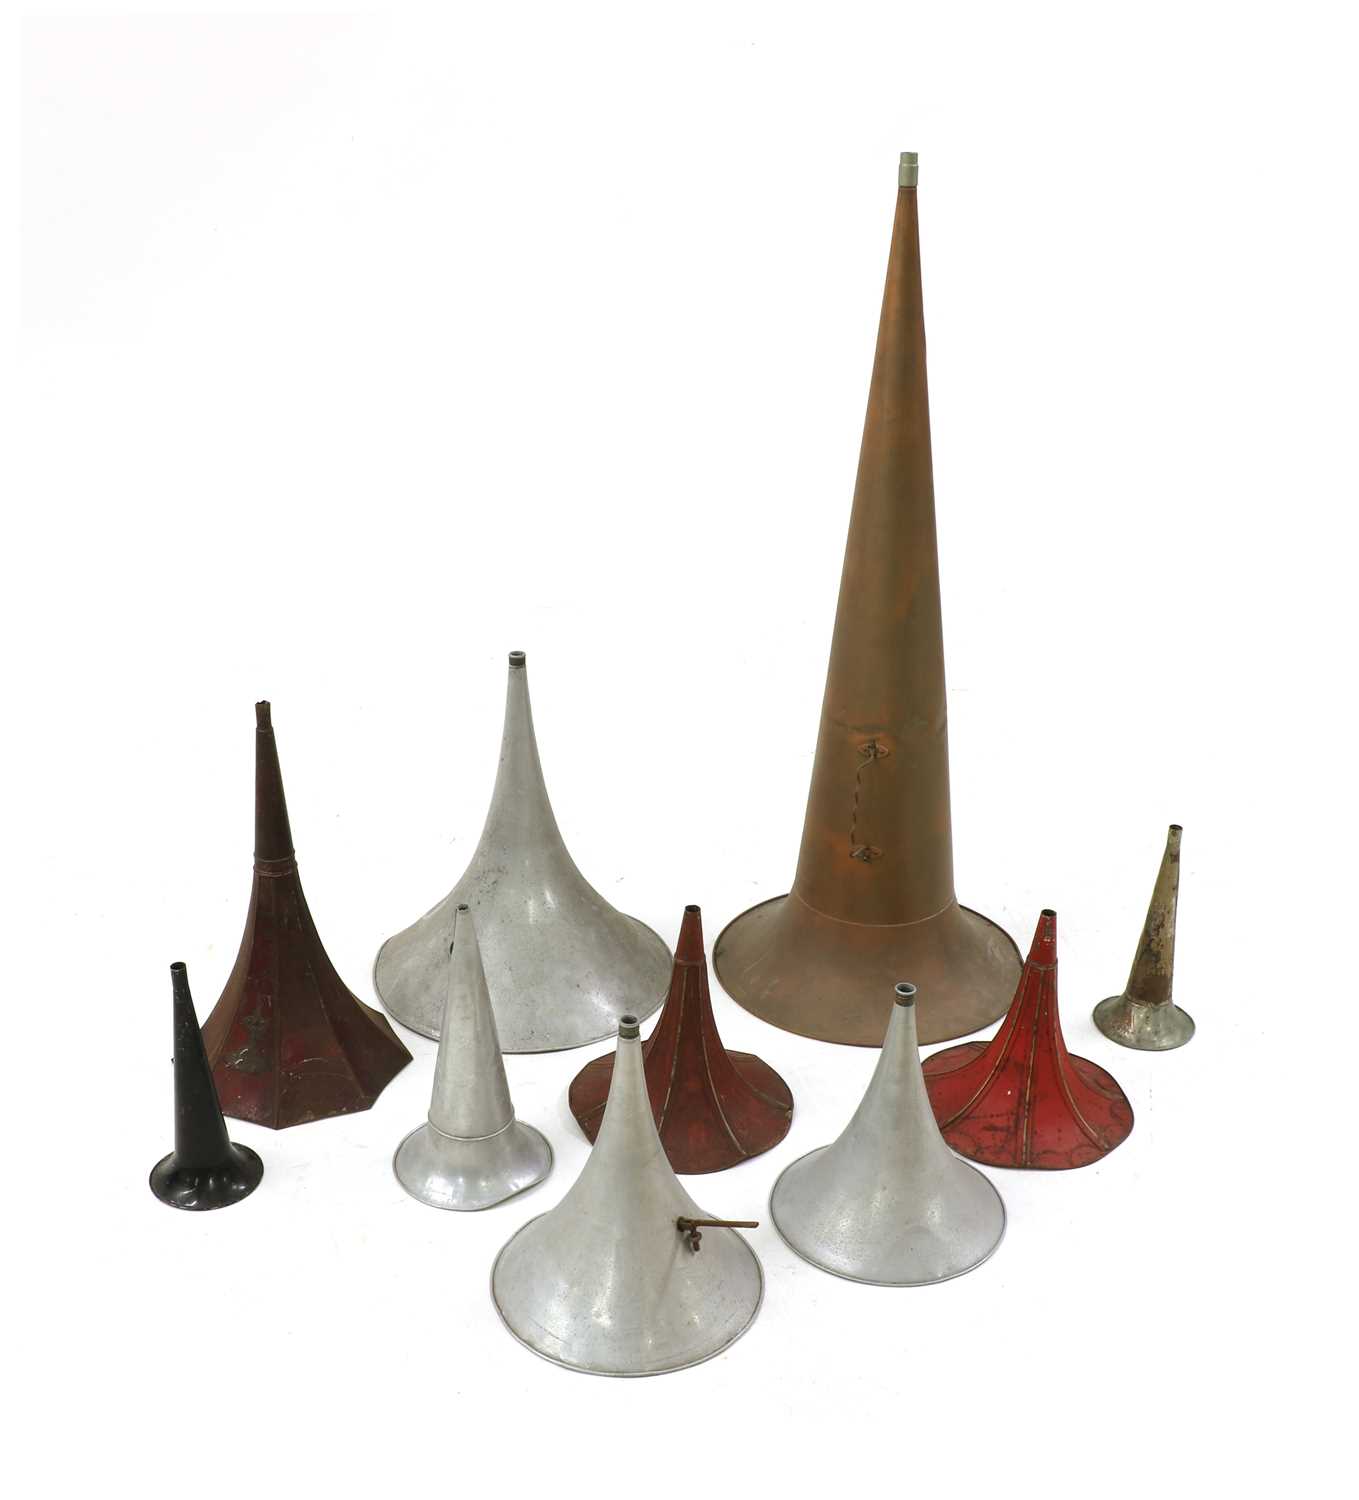 Lot 21 - A Fine selection of Phonograph and Gramophone Horns